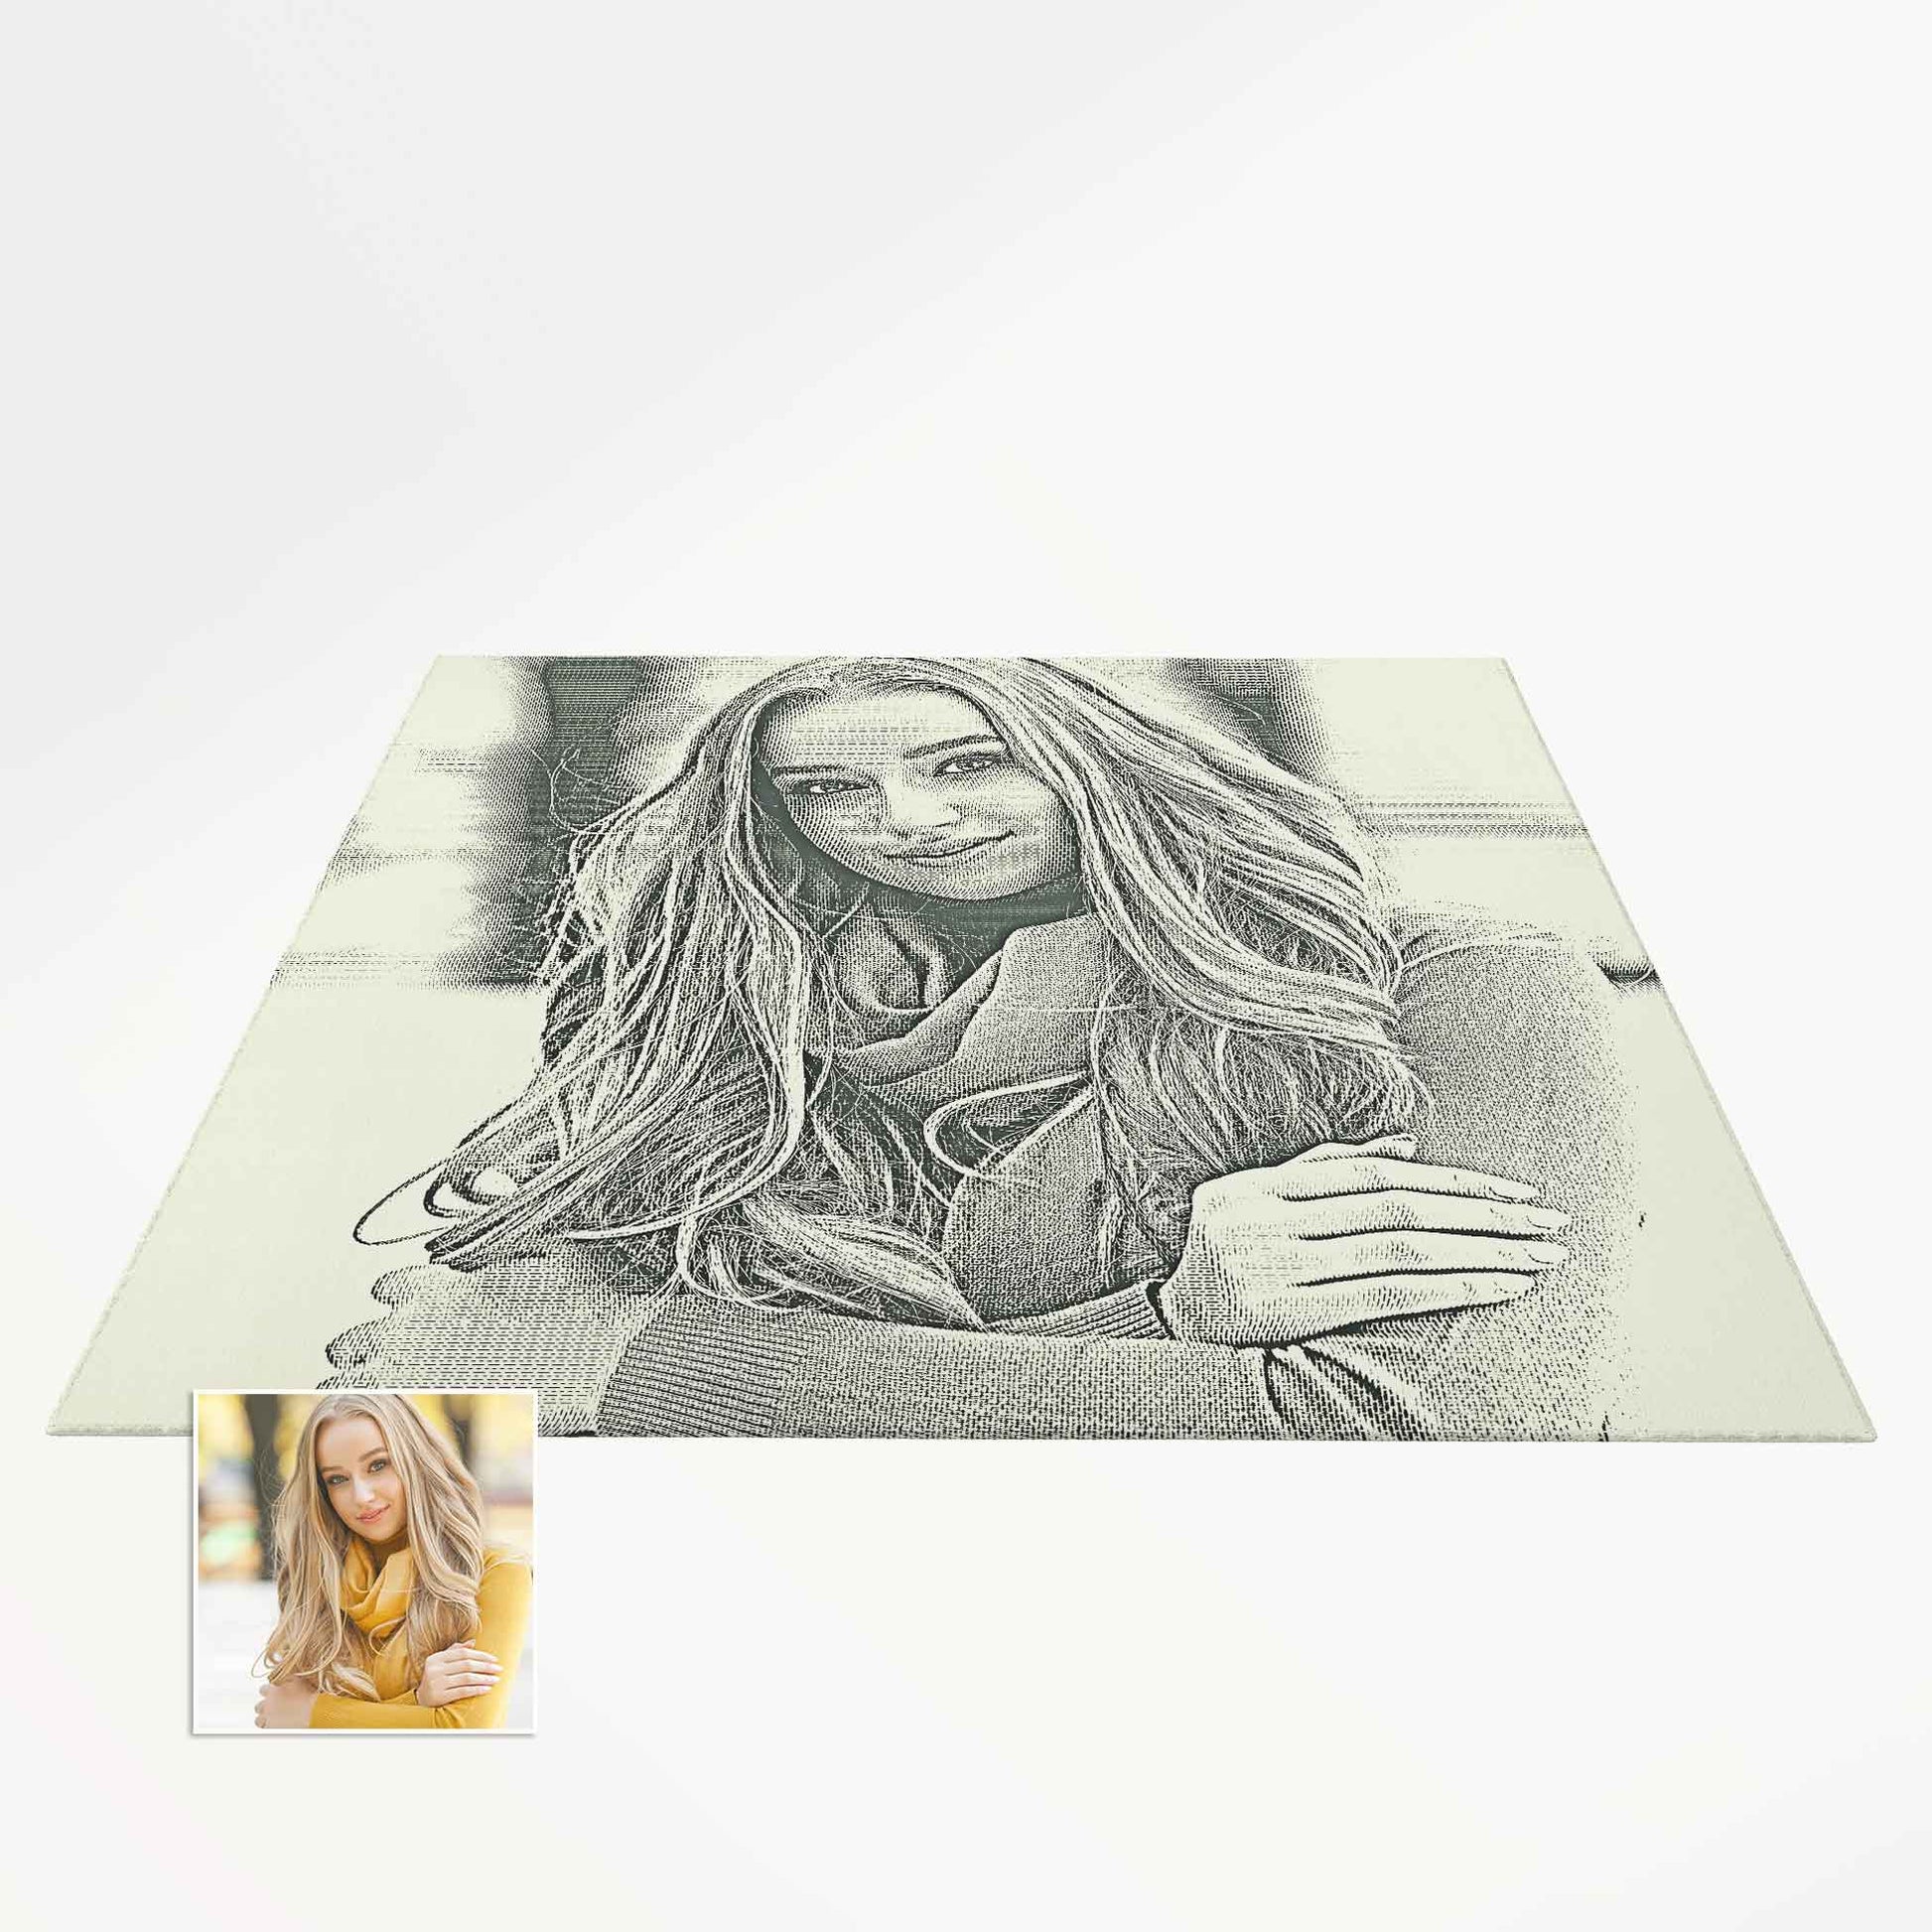 Step into a world of luxury with our Personalised Money Engraved Photo Rug. Make every step a statement of prosperity and abundance